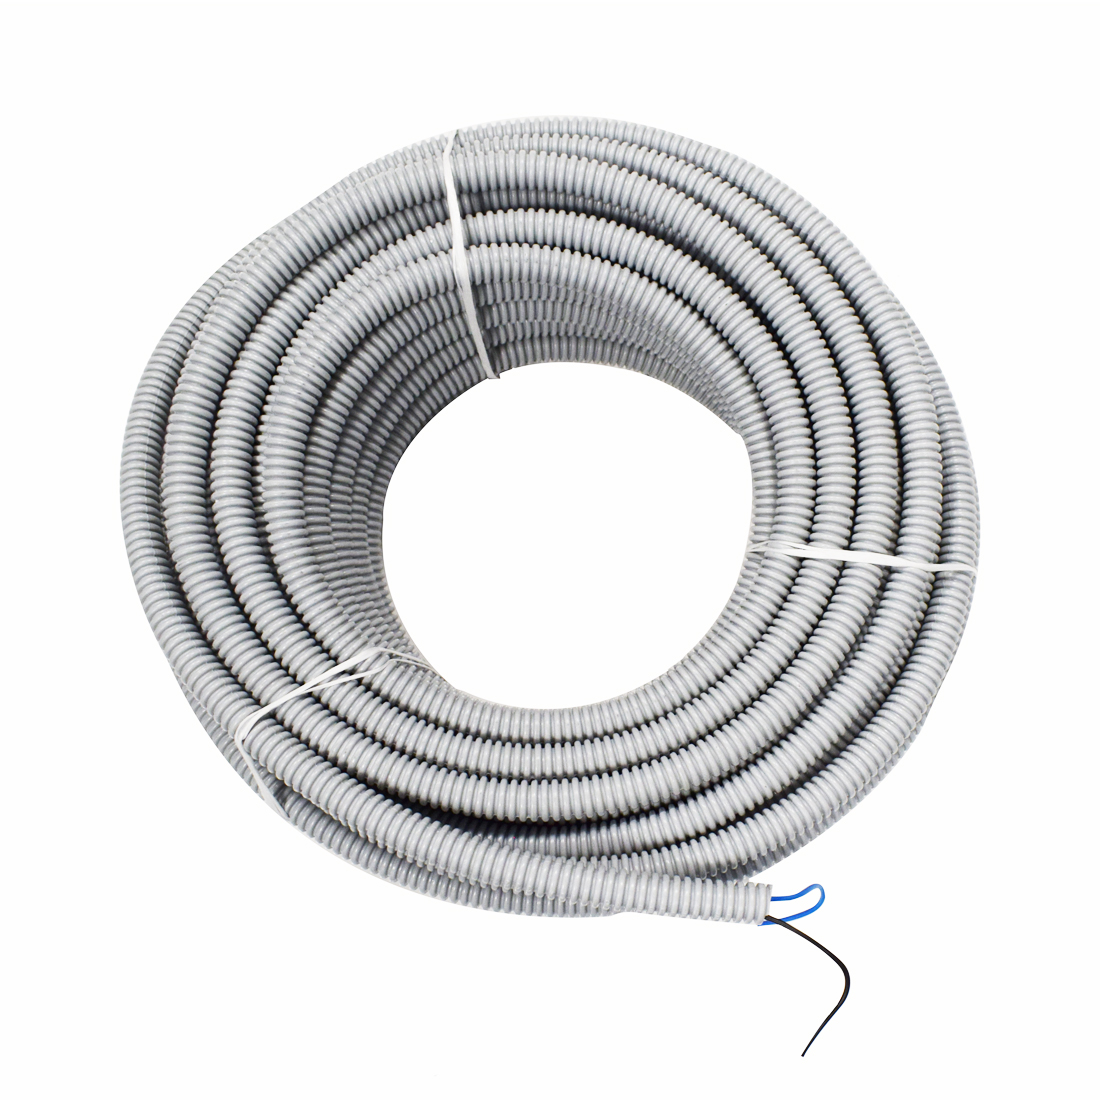 Sachvac Electrical Conduit with 2 x 0.5 Cables